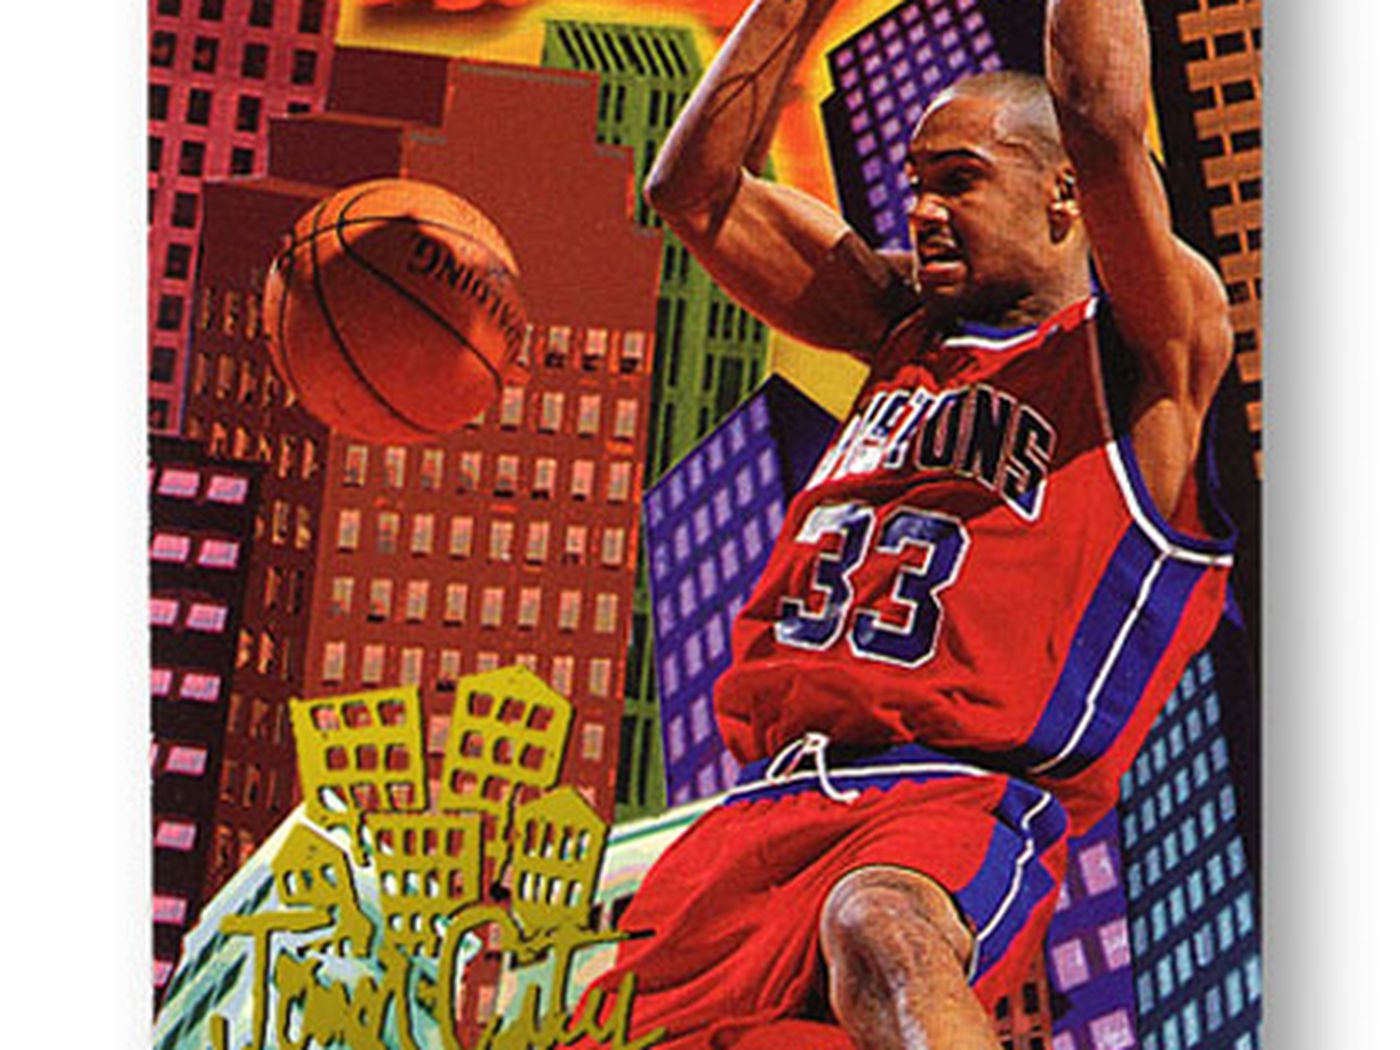 80's 90's most valuable basketball cards from the 90's